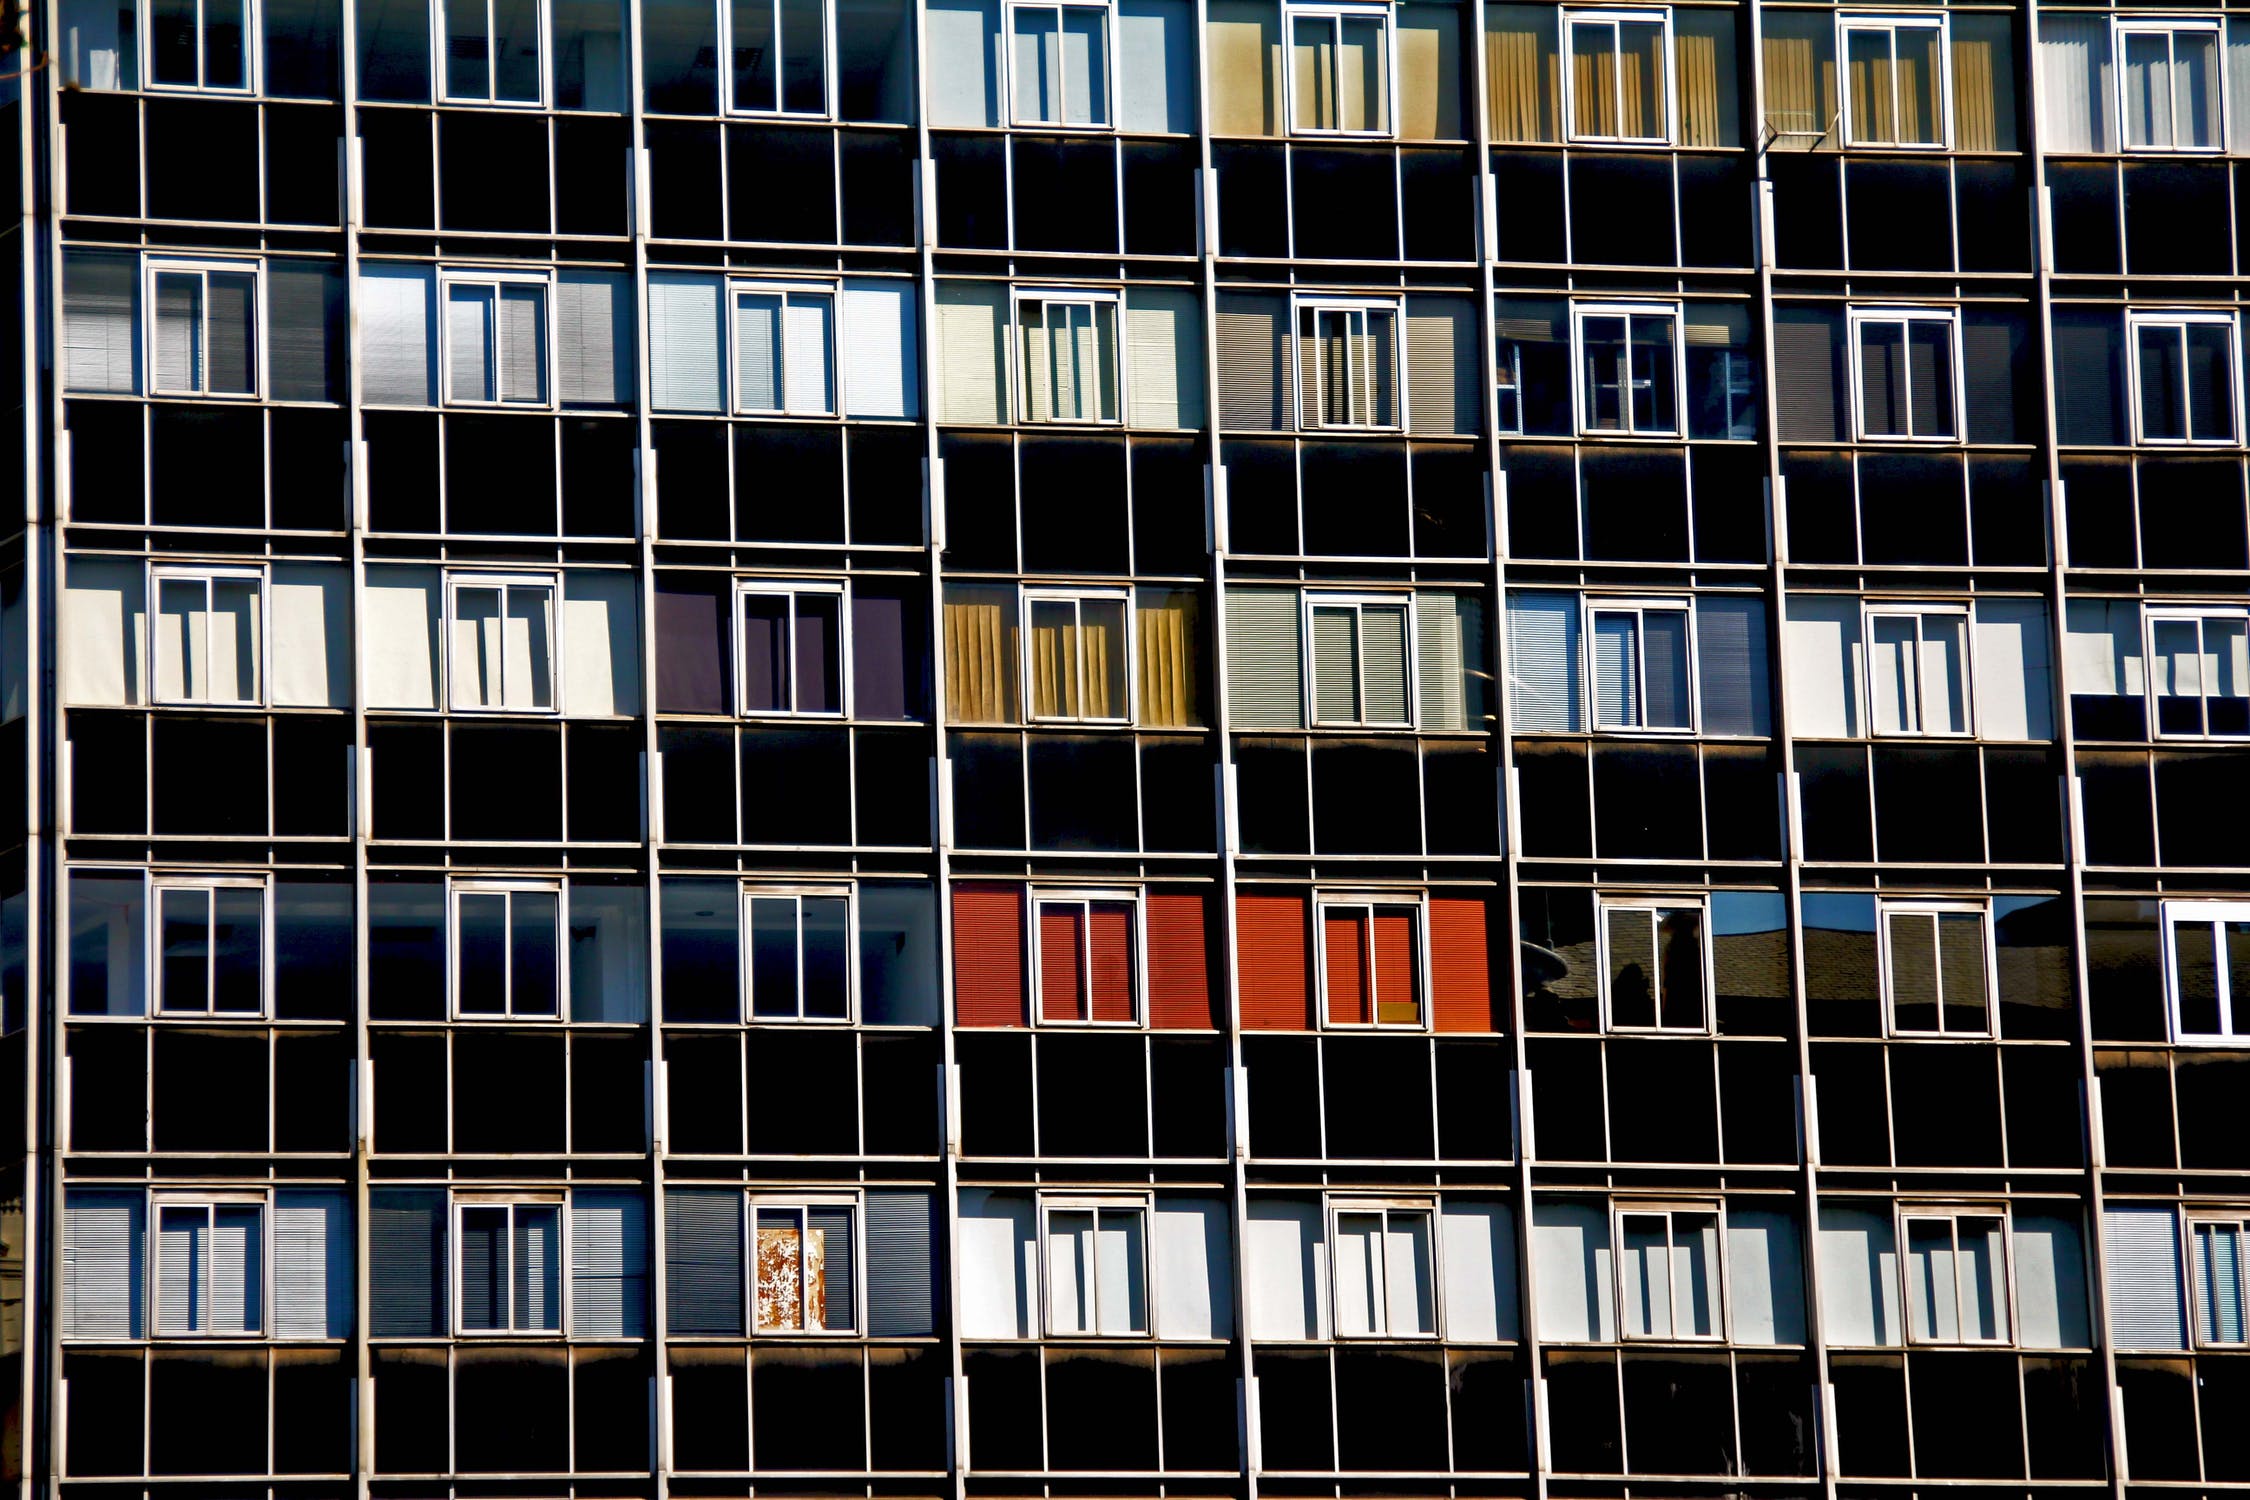 Facade of a modern apartment building with a pattern of colorful balconies and tenants waiting.